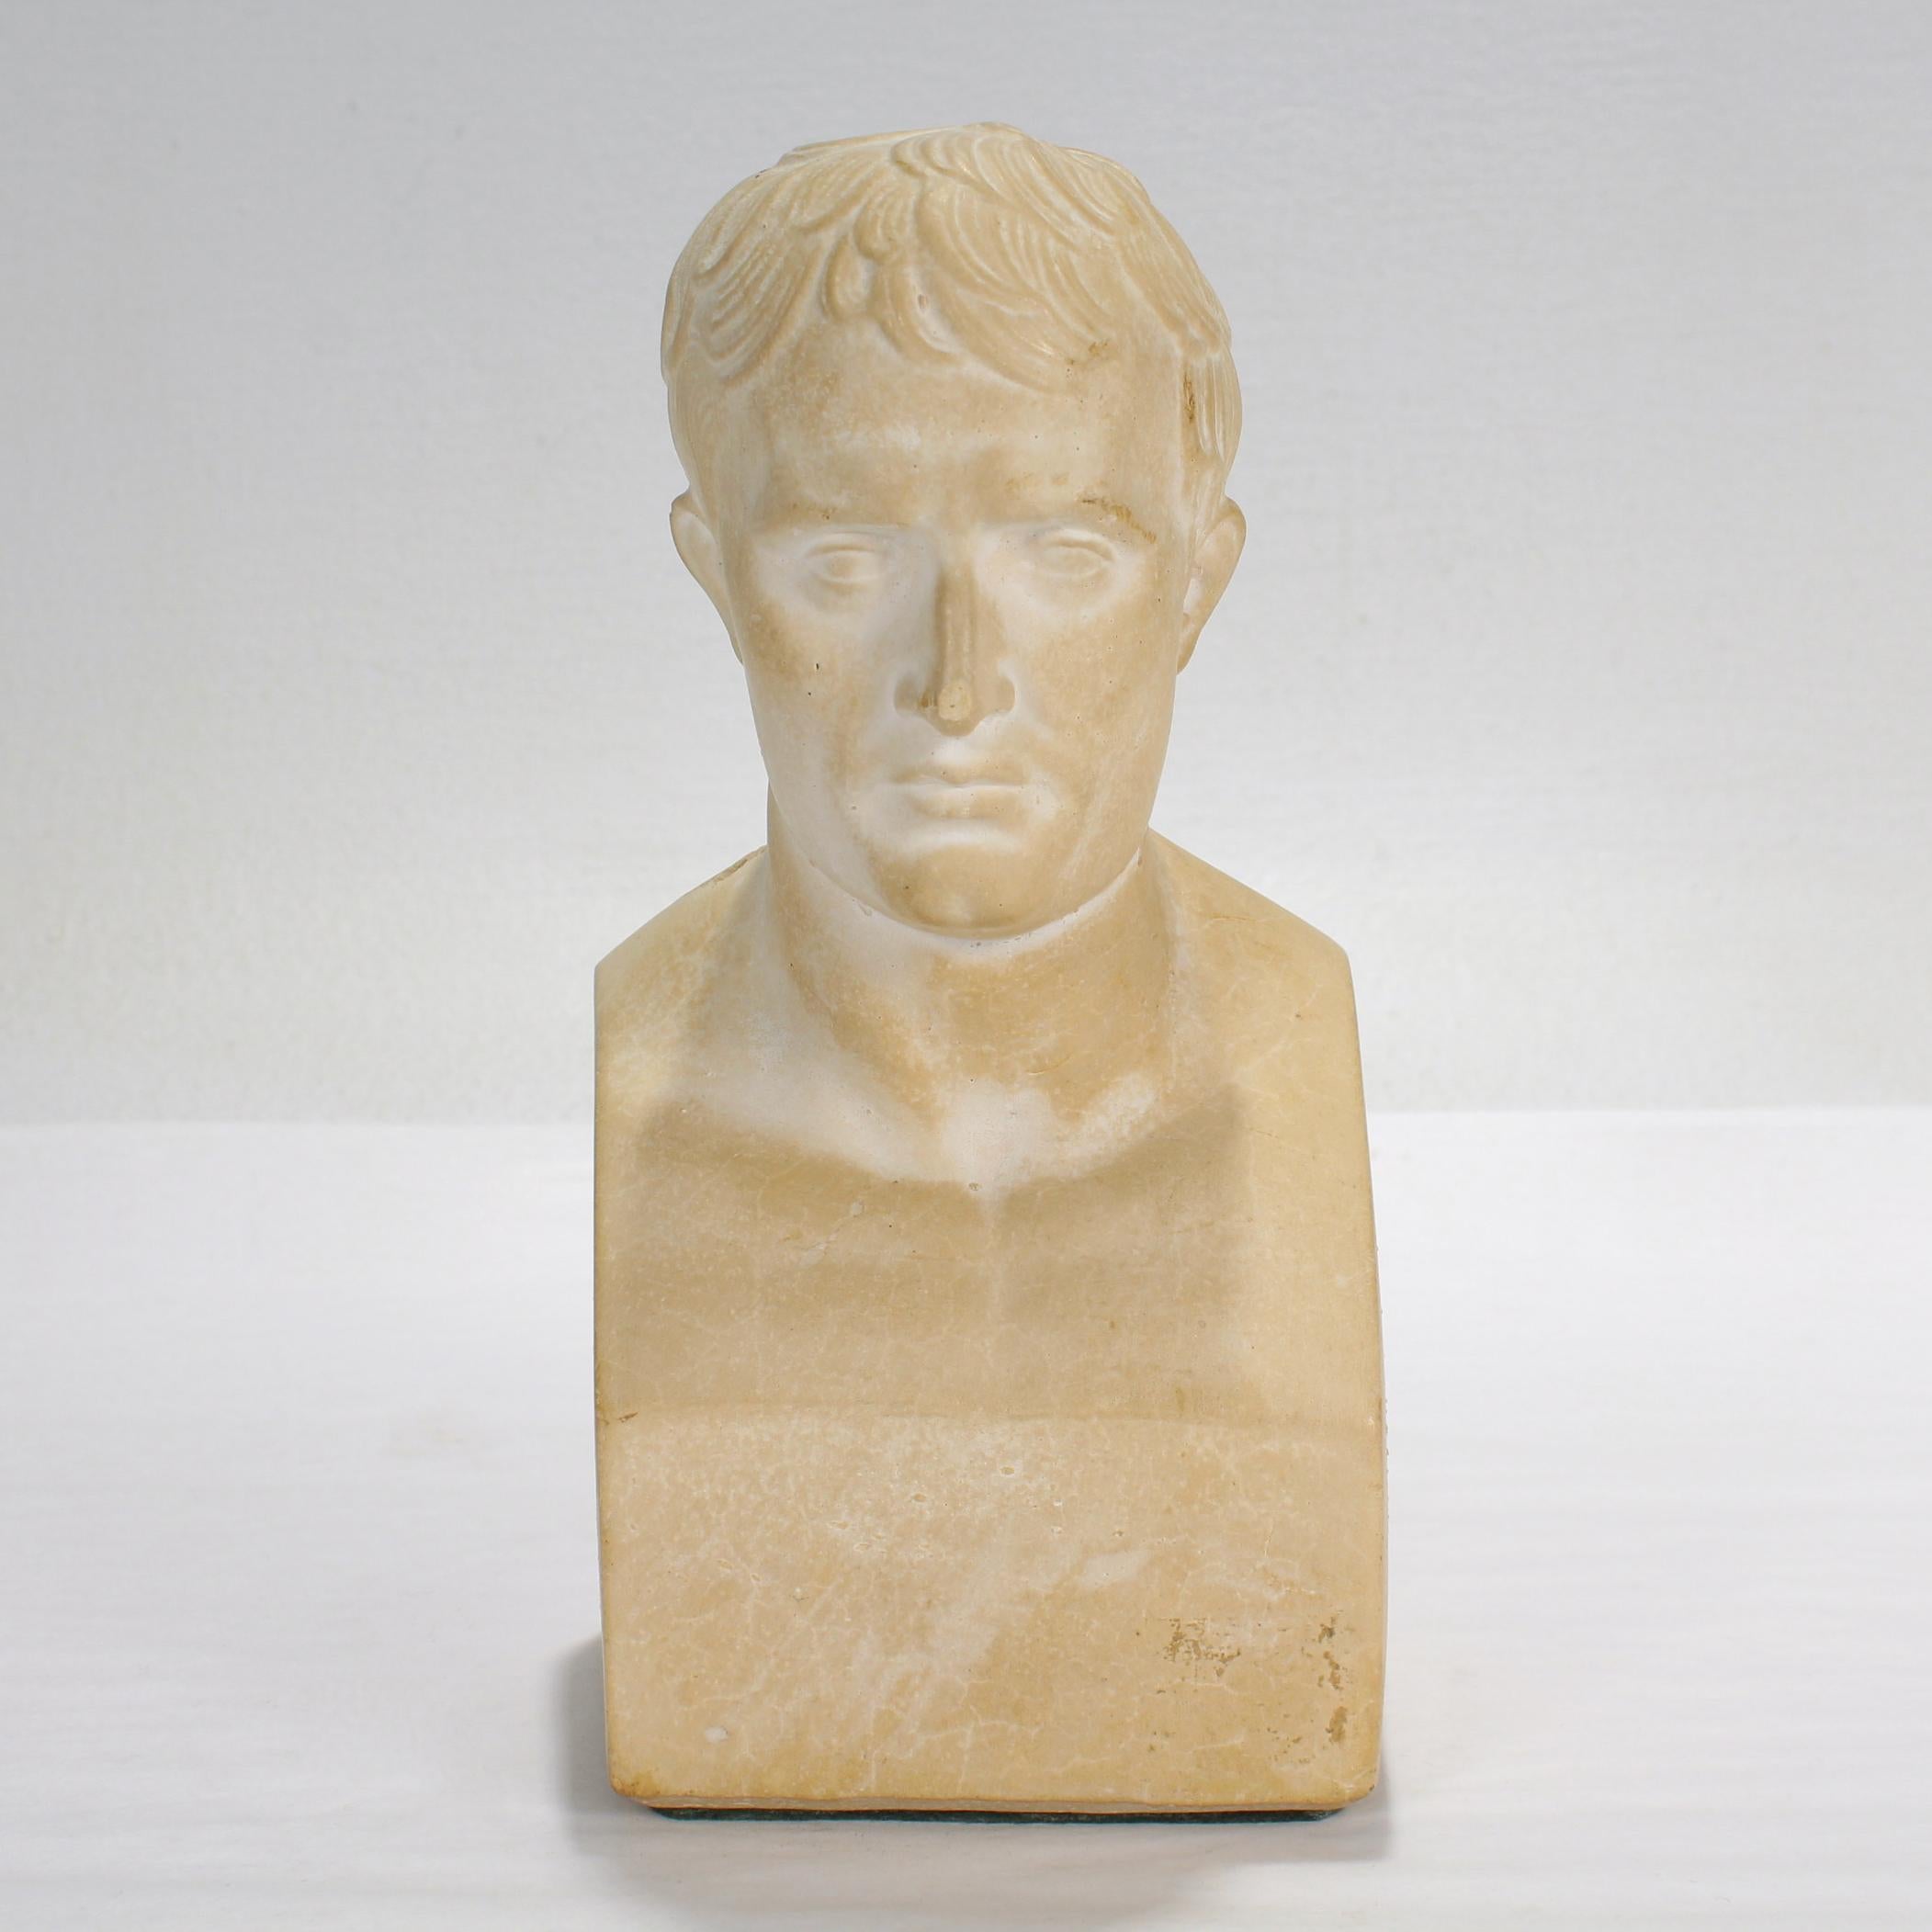 A miniature plaster bust depicting Napoleon as Caesar.

After Canova's famous 1804 model. 

Simply a wonderful bust for the curio cabinet or Wunderkammer!

Date:
20th Century

Overall Condition:
It is in overall good, as-pictured, used